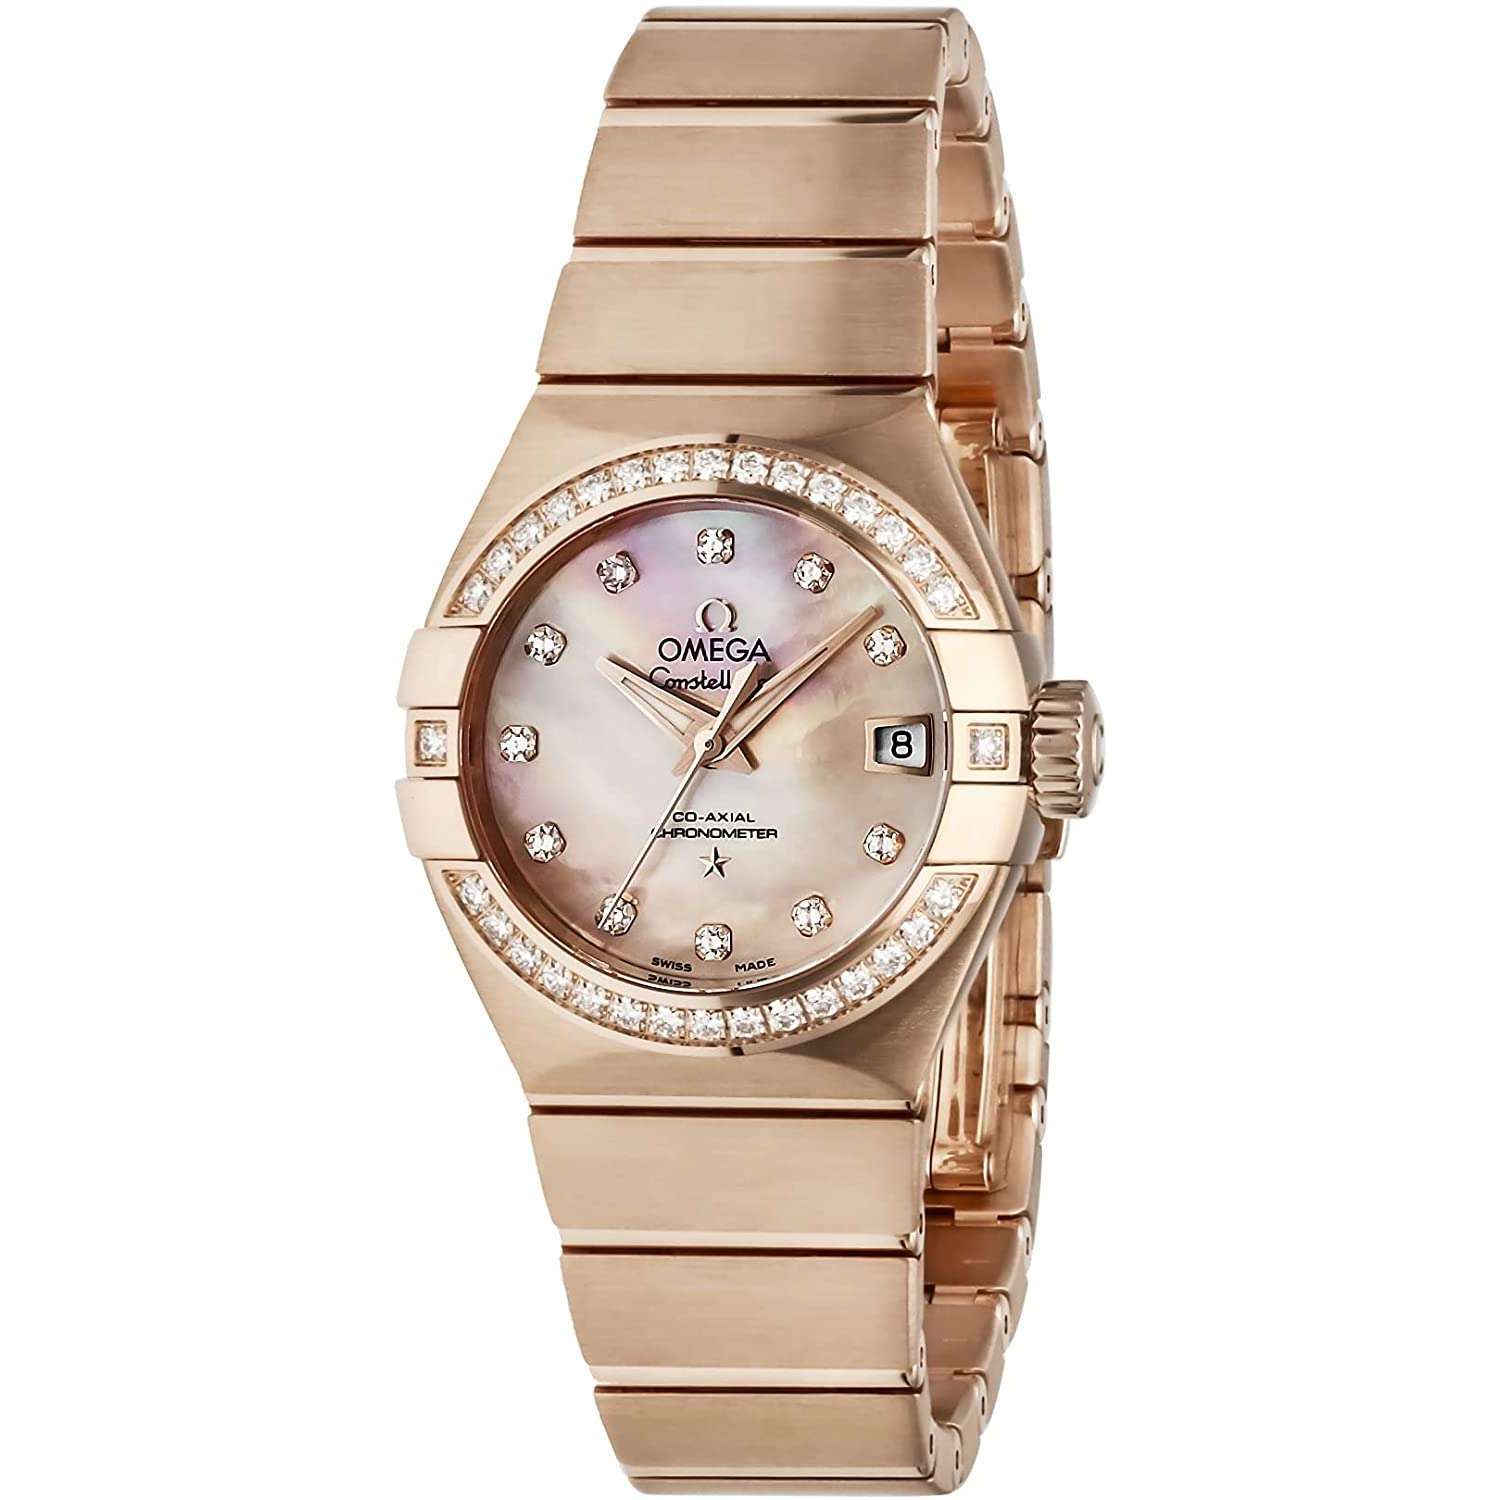 ROOK JAPAN:OMEGA CONSTELLATION CO‑AXIAL CHRONOMETER 27 MM WOMEN WATCH 123.55.27.20.57.001,Luxury Watch,Omega